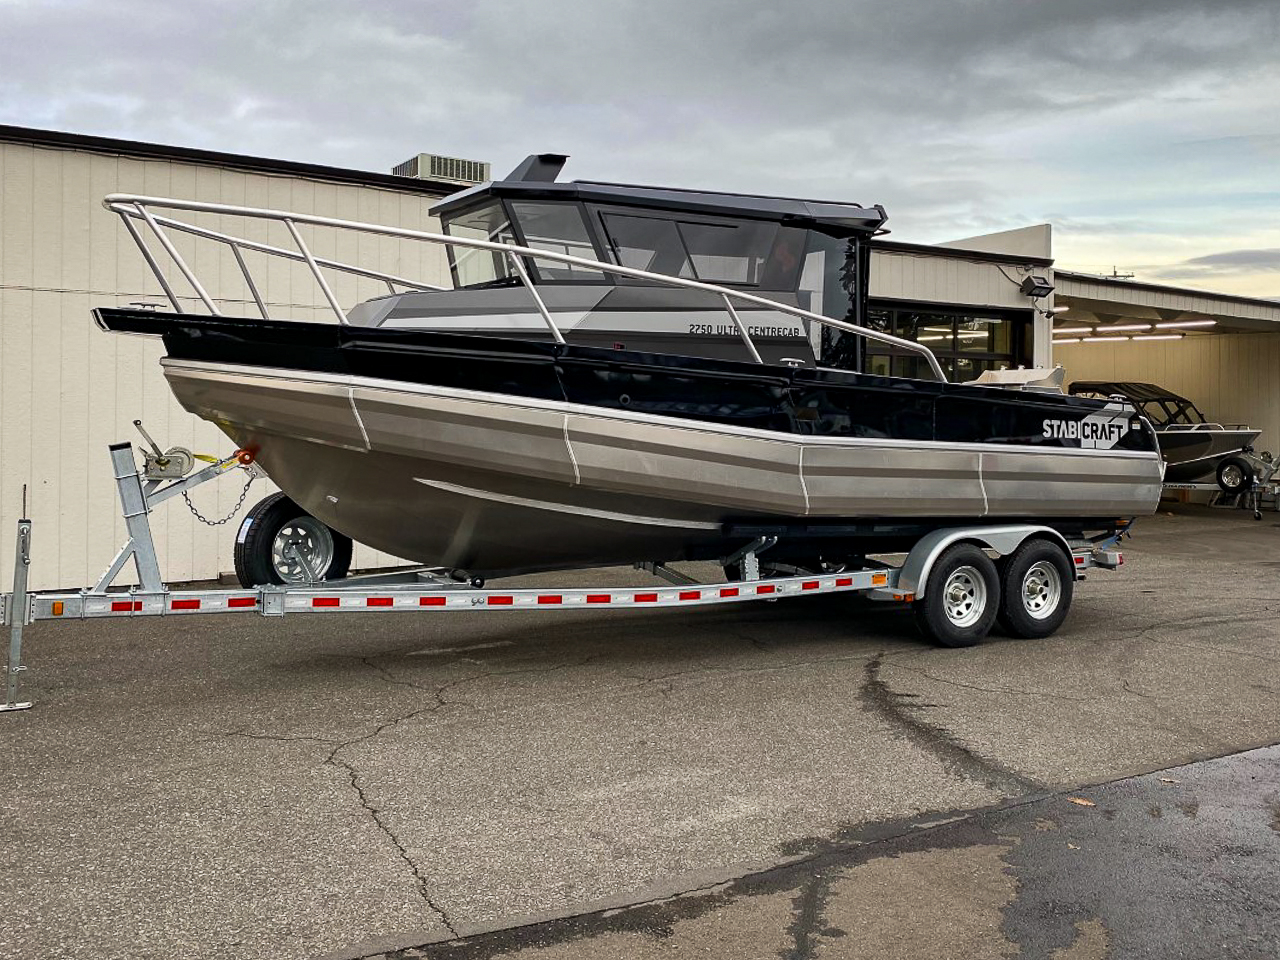 Stabicraft 2750 Ultra Centercab boats for sale